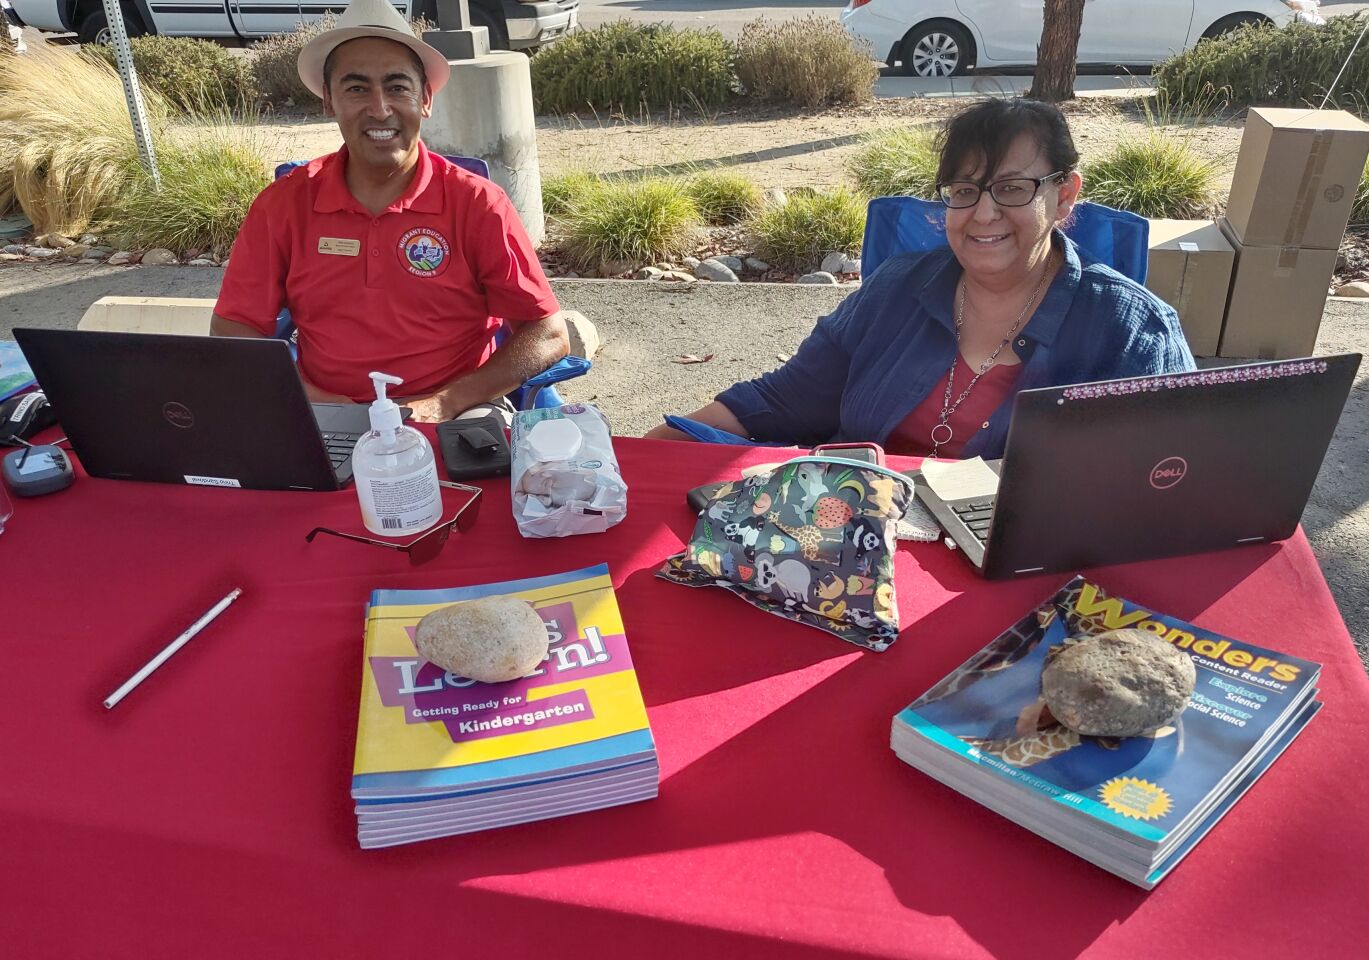 San Diego County Office of Education representatives Trino Sandoval, left, and Angelica Quezada hand out educational information and promoted reading and learning.